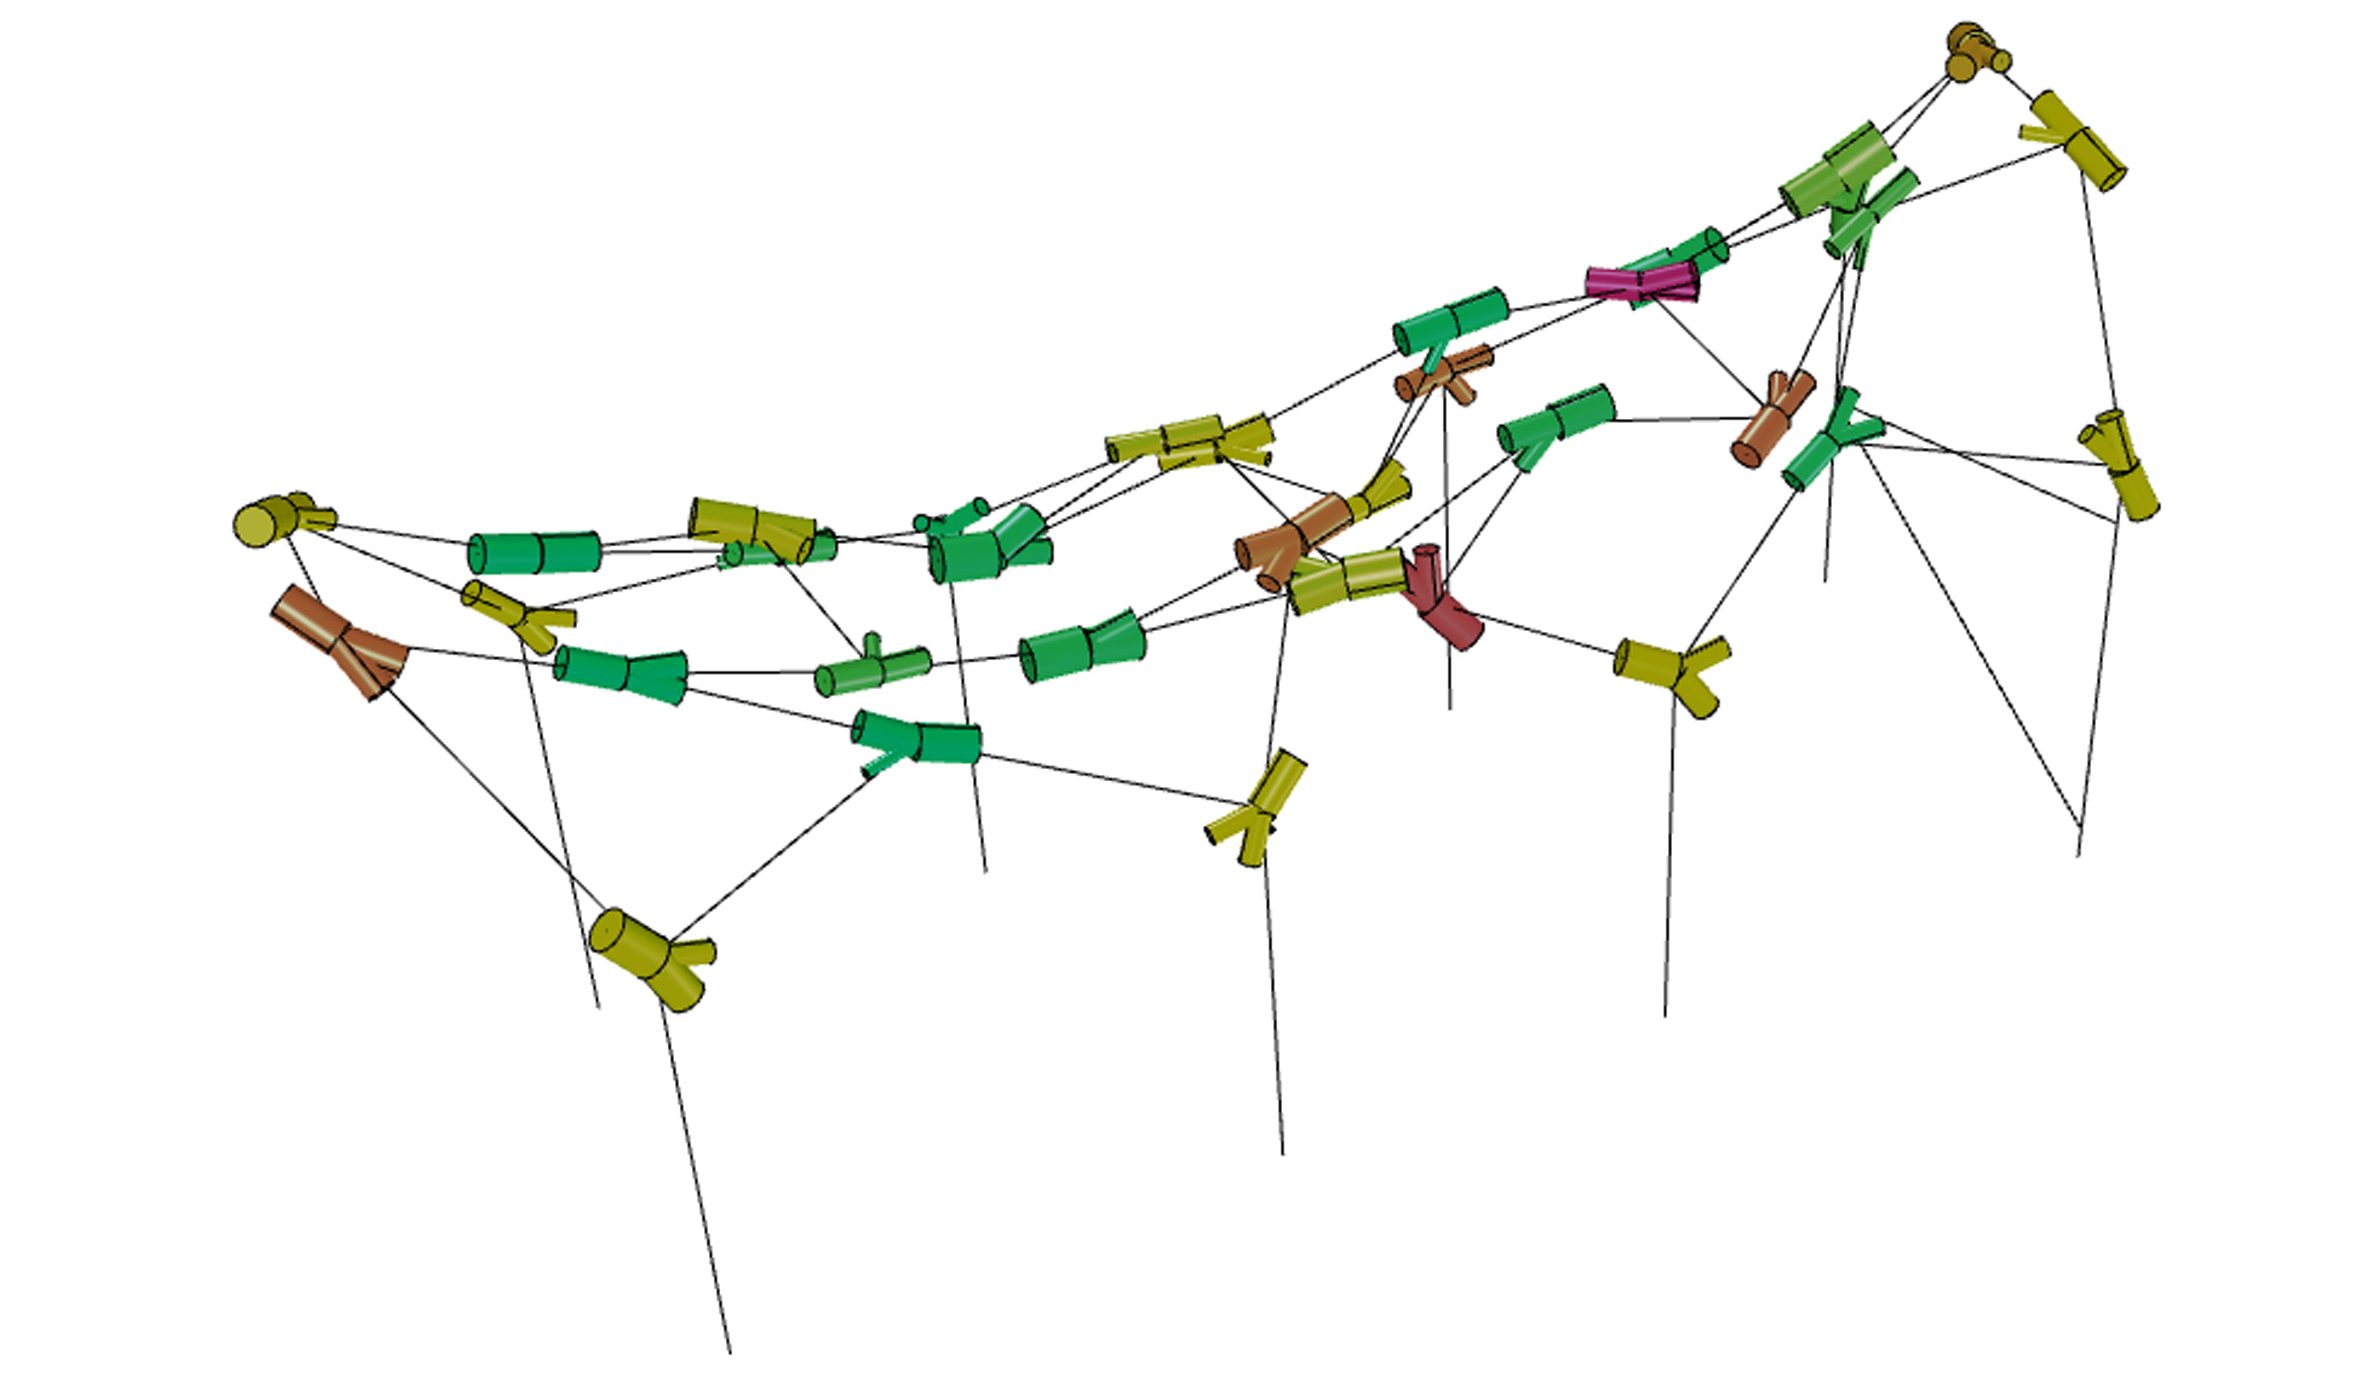 Digital architectural design showing tree forks matched to nodes, with good matches in green, poor in red and okay in yellow